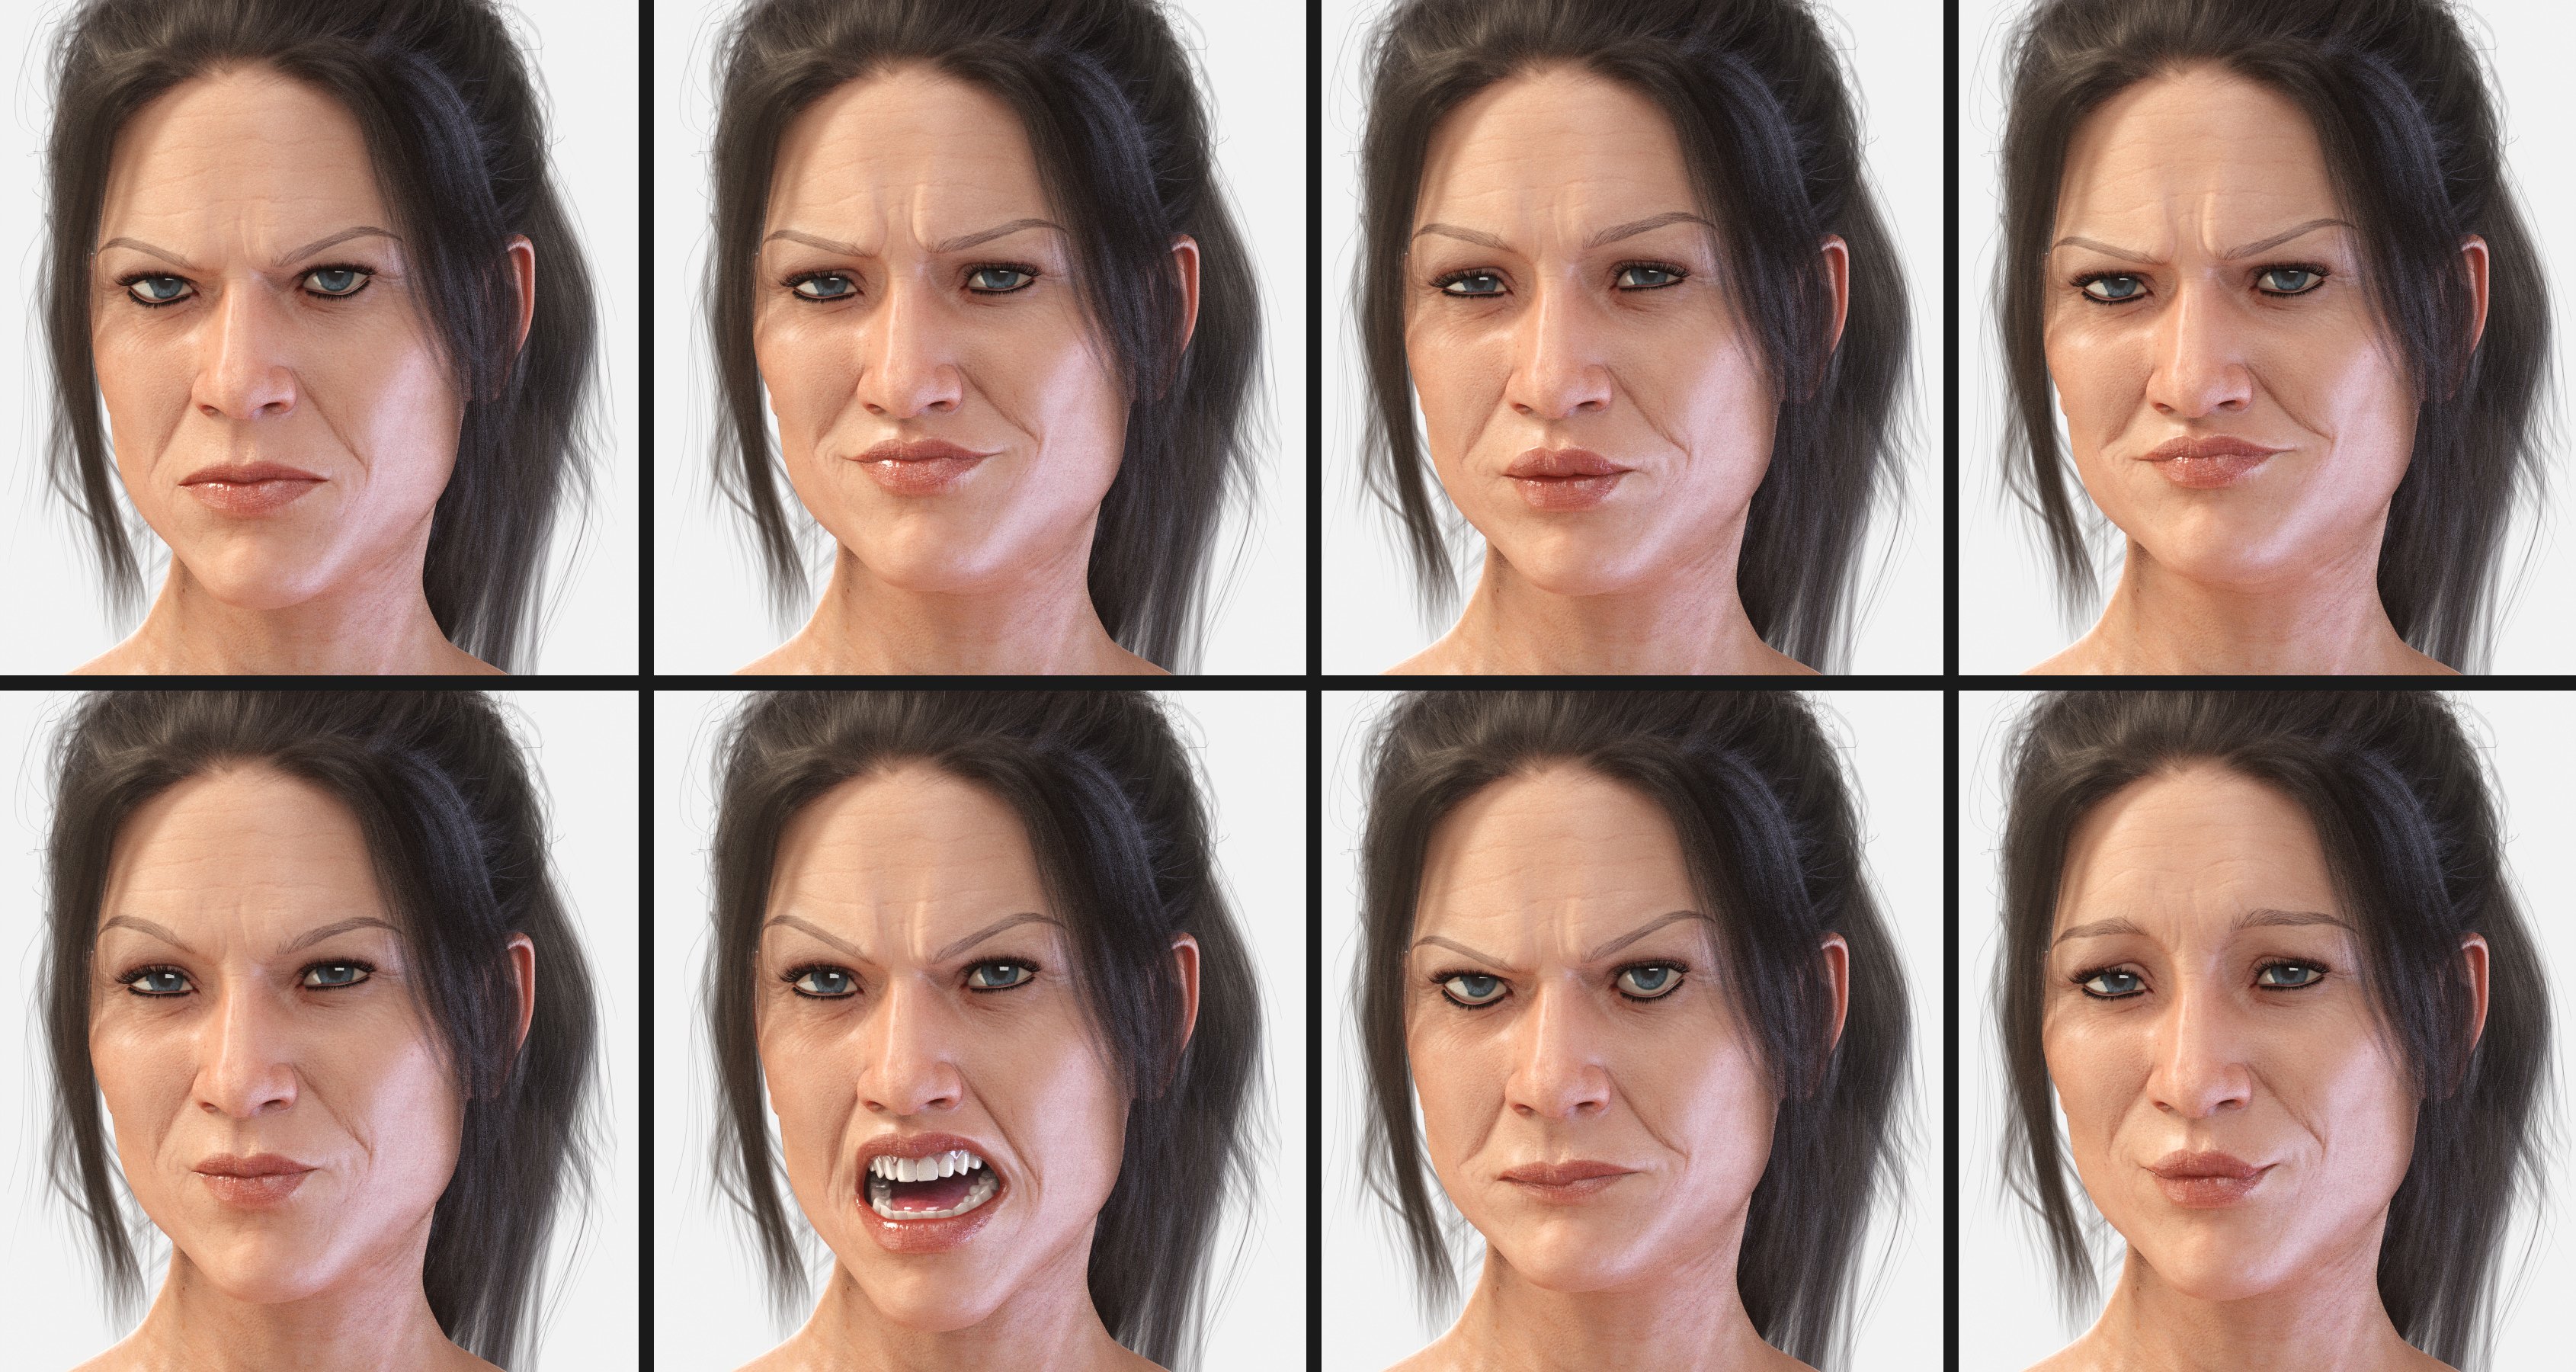 Sydney Expressive for Sydney 8 and Genesis 8 Female by: Neikdian, 3D Models by Daz 3D